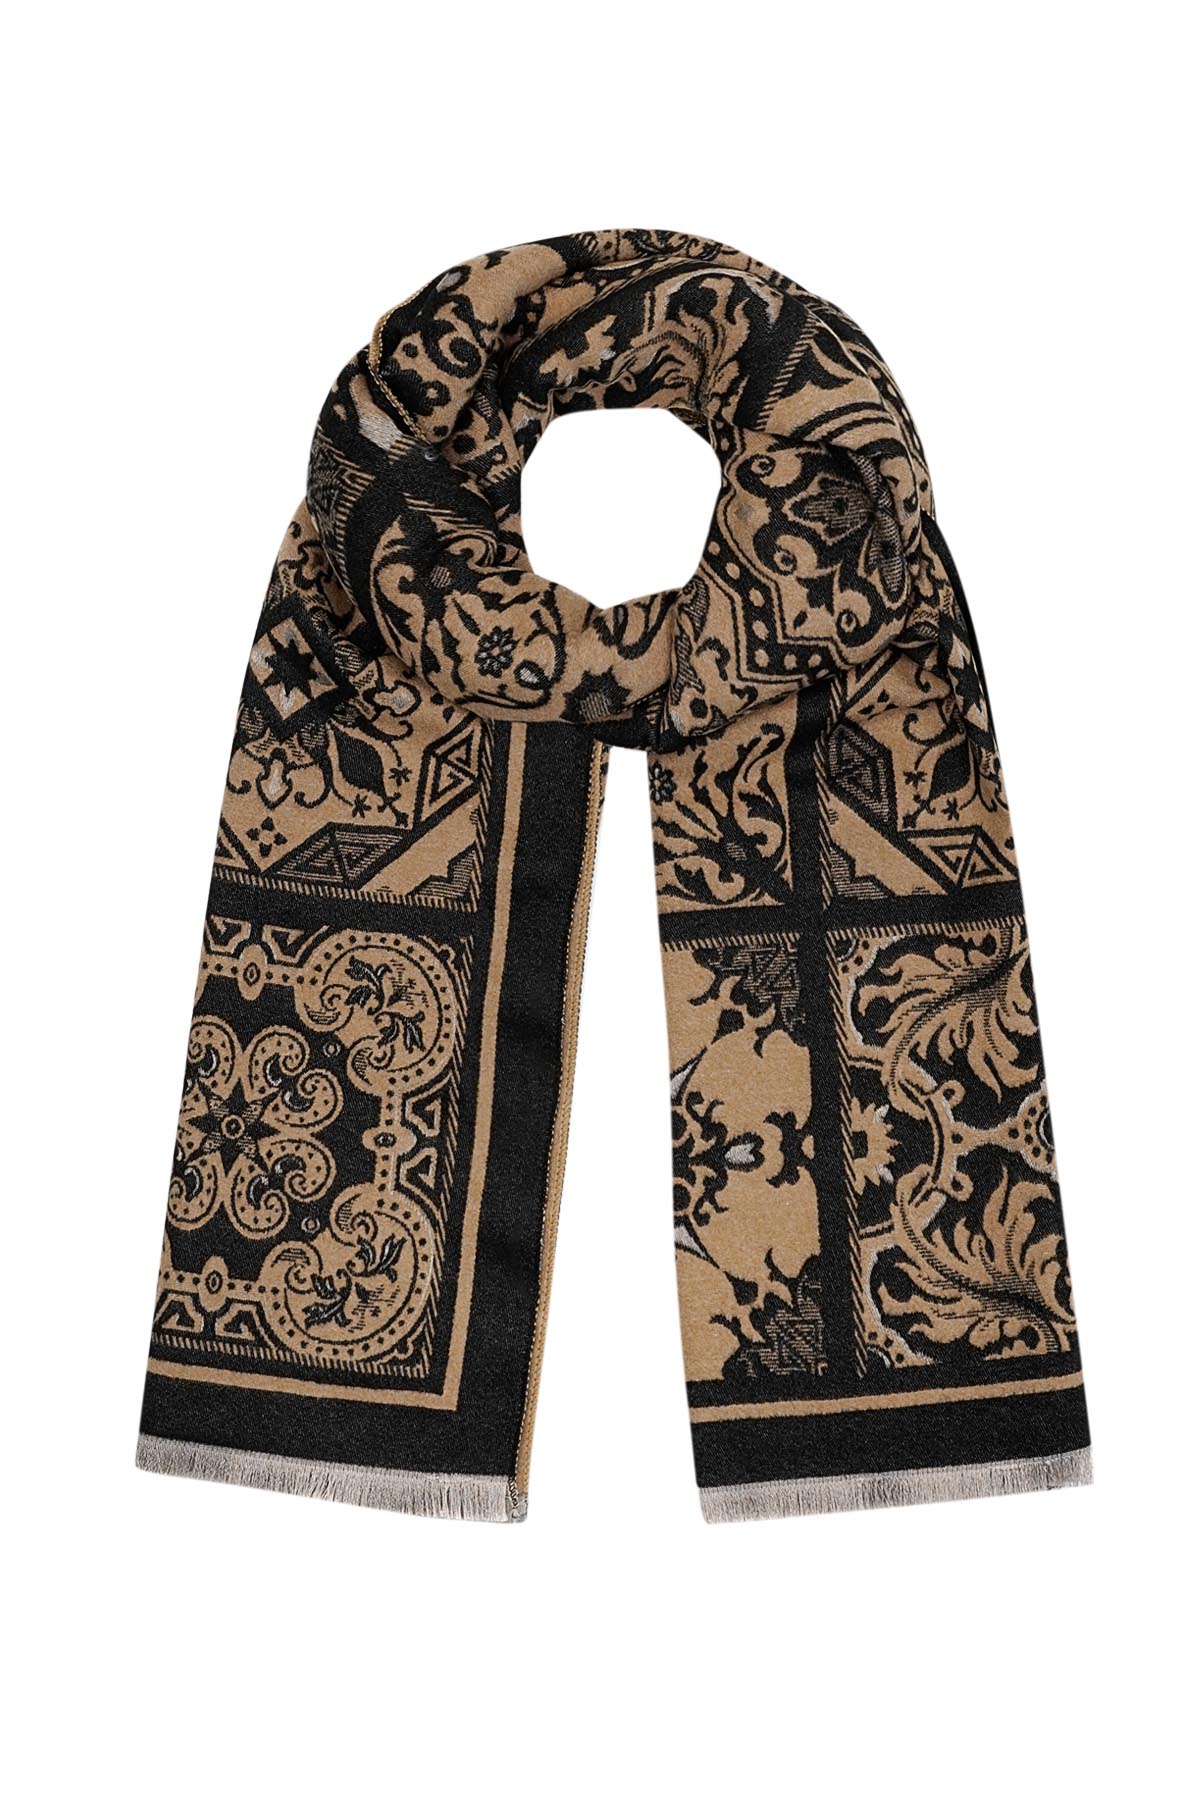 Scarf with retro print - brown black 